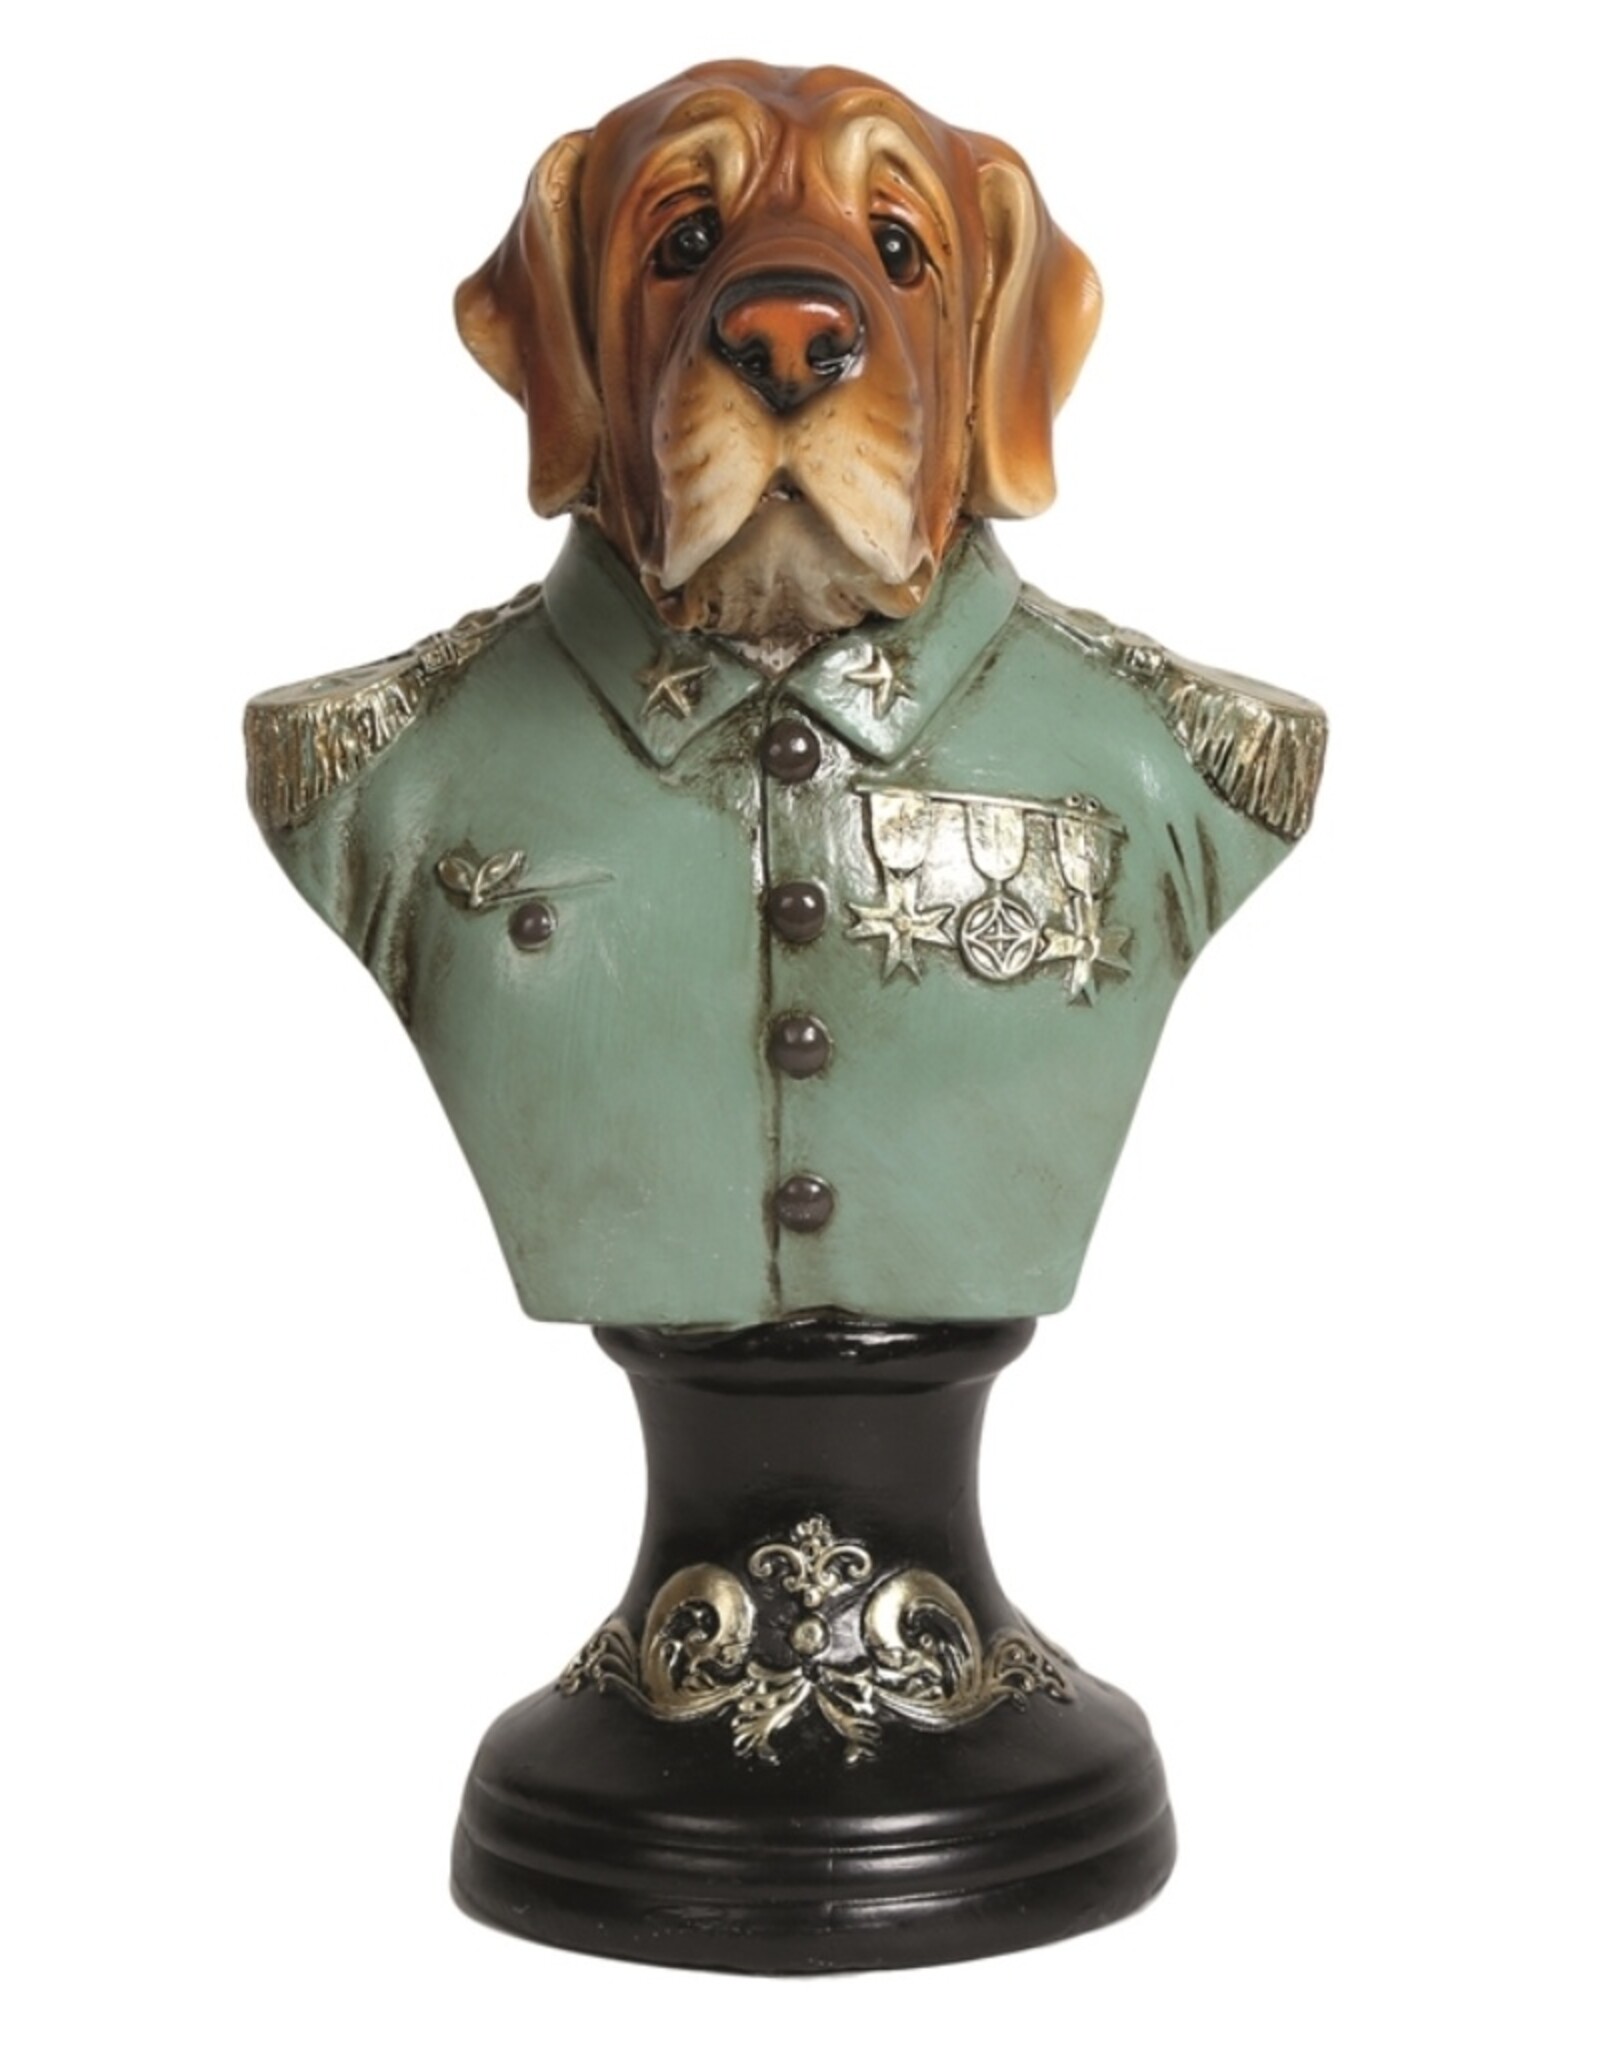 Sparks Giftware & Lifestyle - Mastiff in Military Uniform Bust 26cm